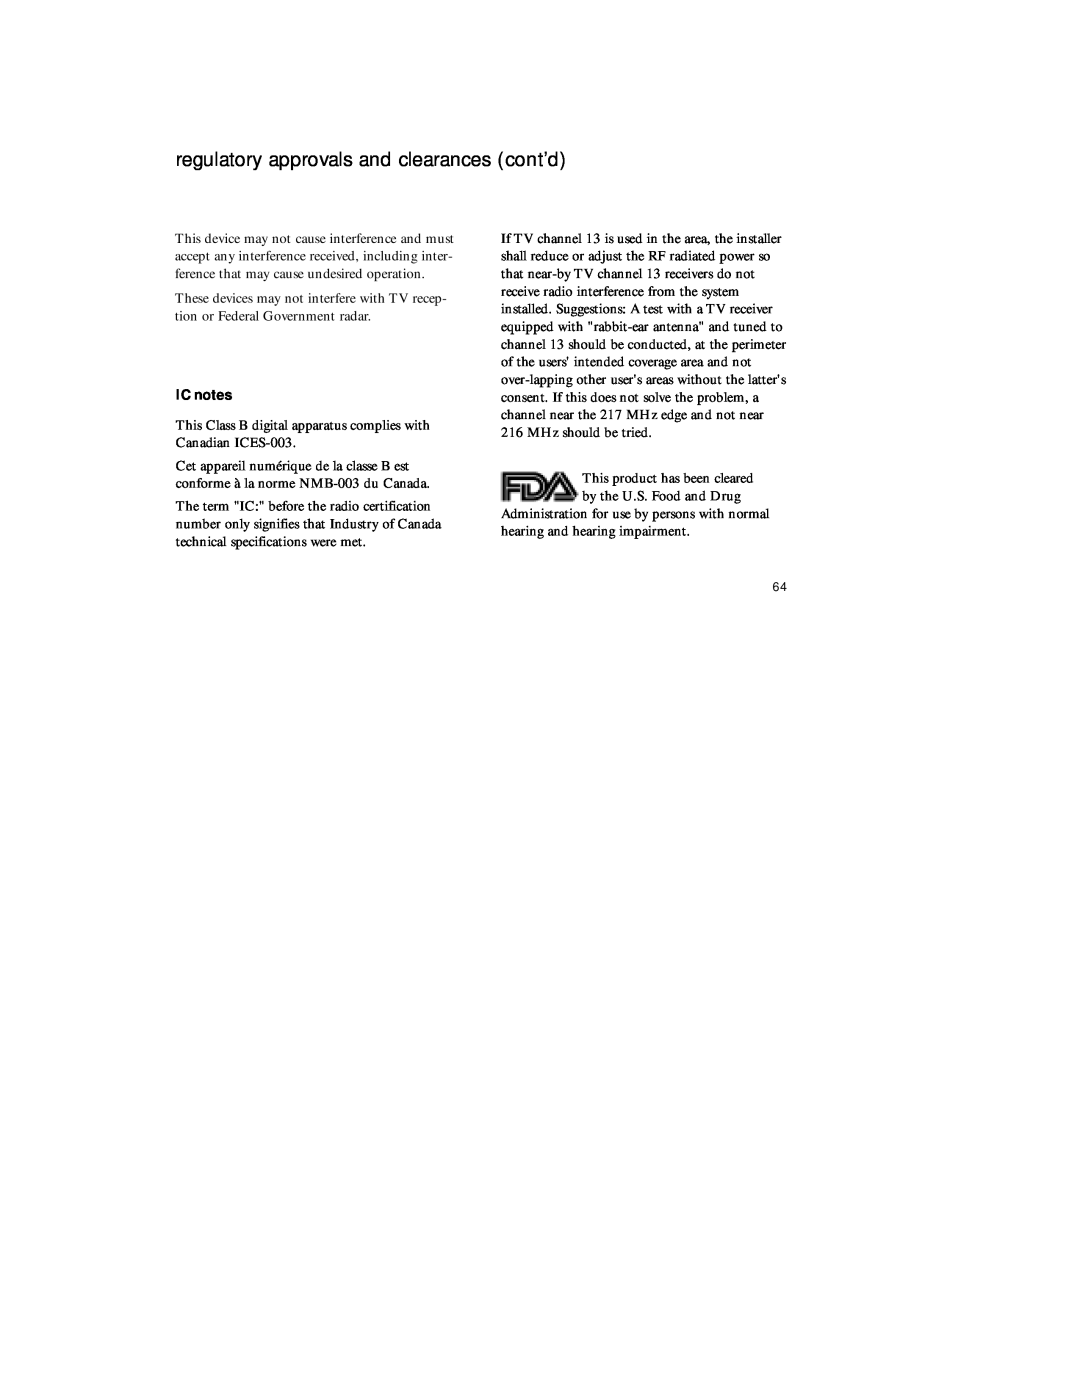 Radio Shack 920SR manual regulatory approvals and clearances cont’d, IC notes 